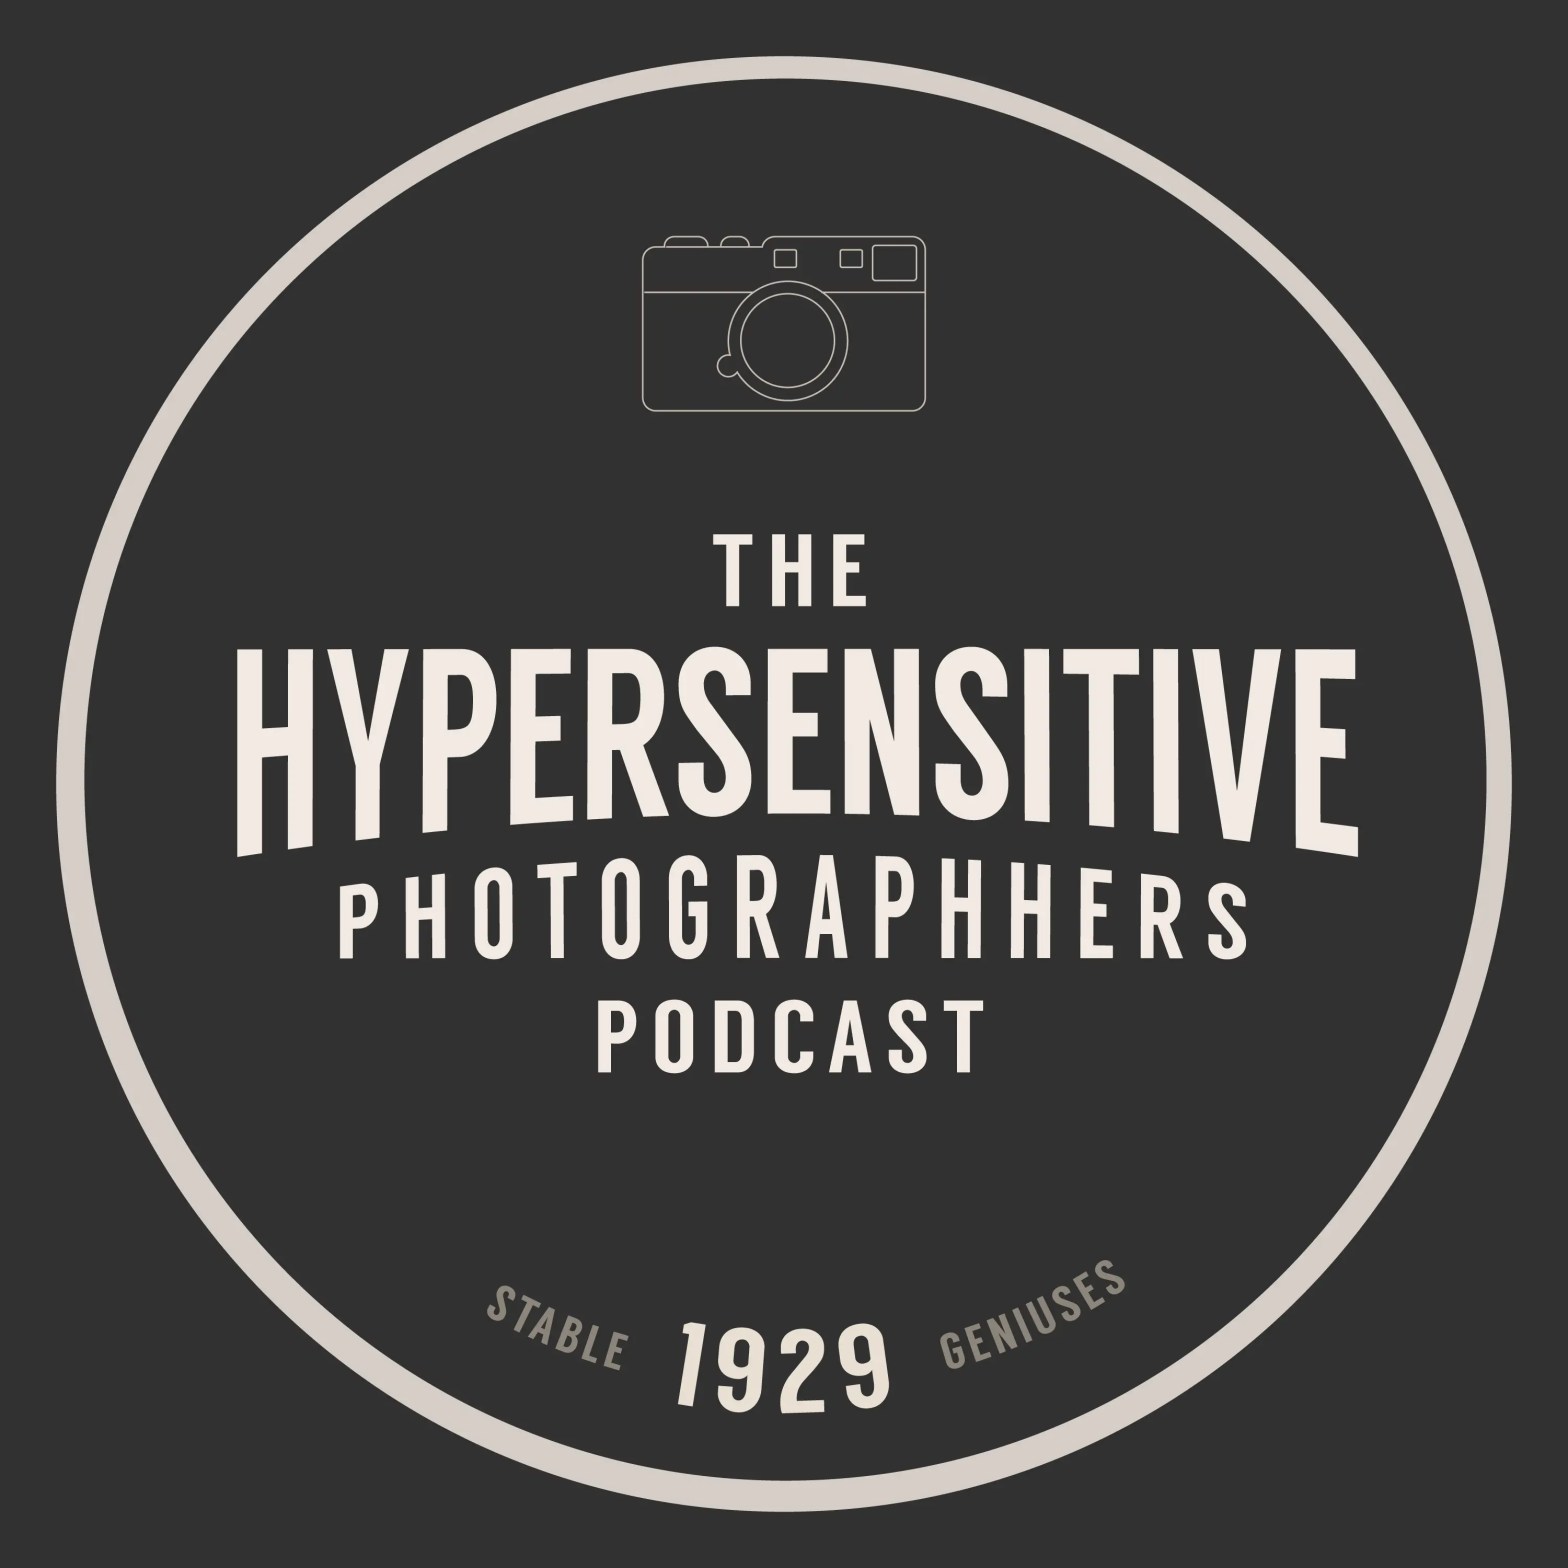 Curmudgeonly commentary: the Hypersensitive Photographers Podcast episode 00